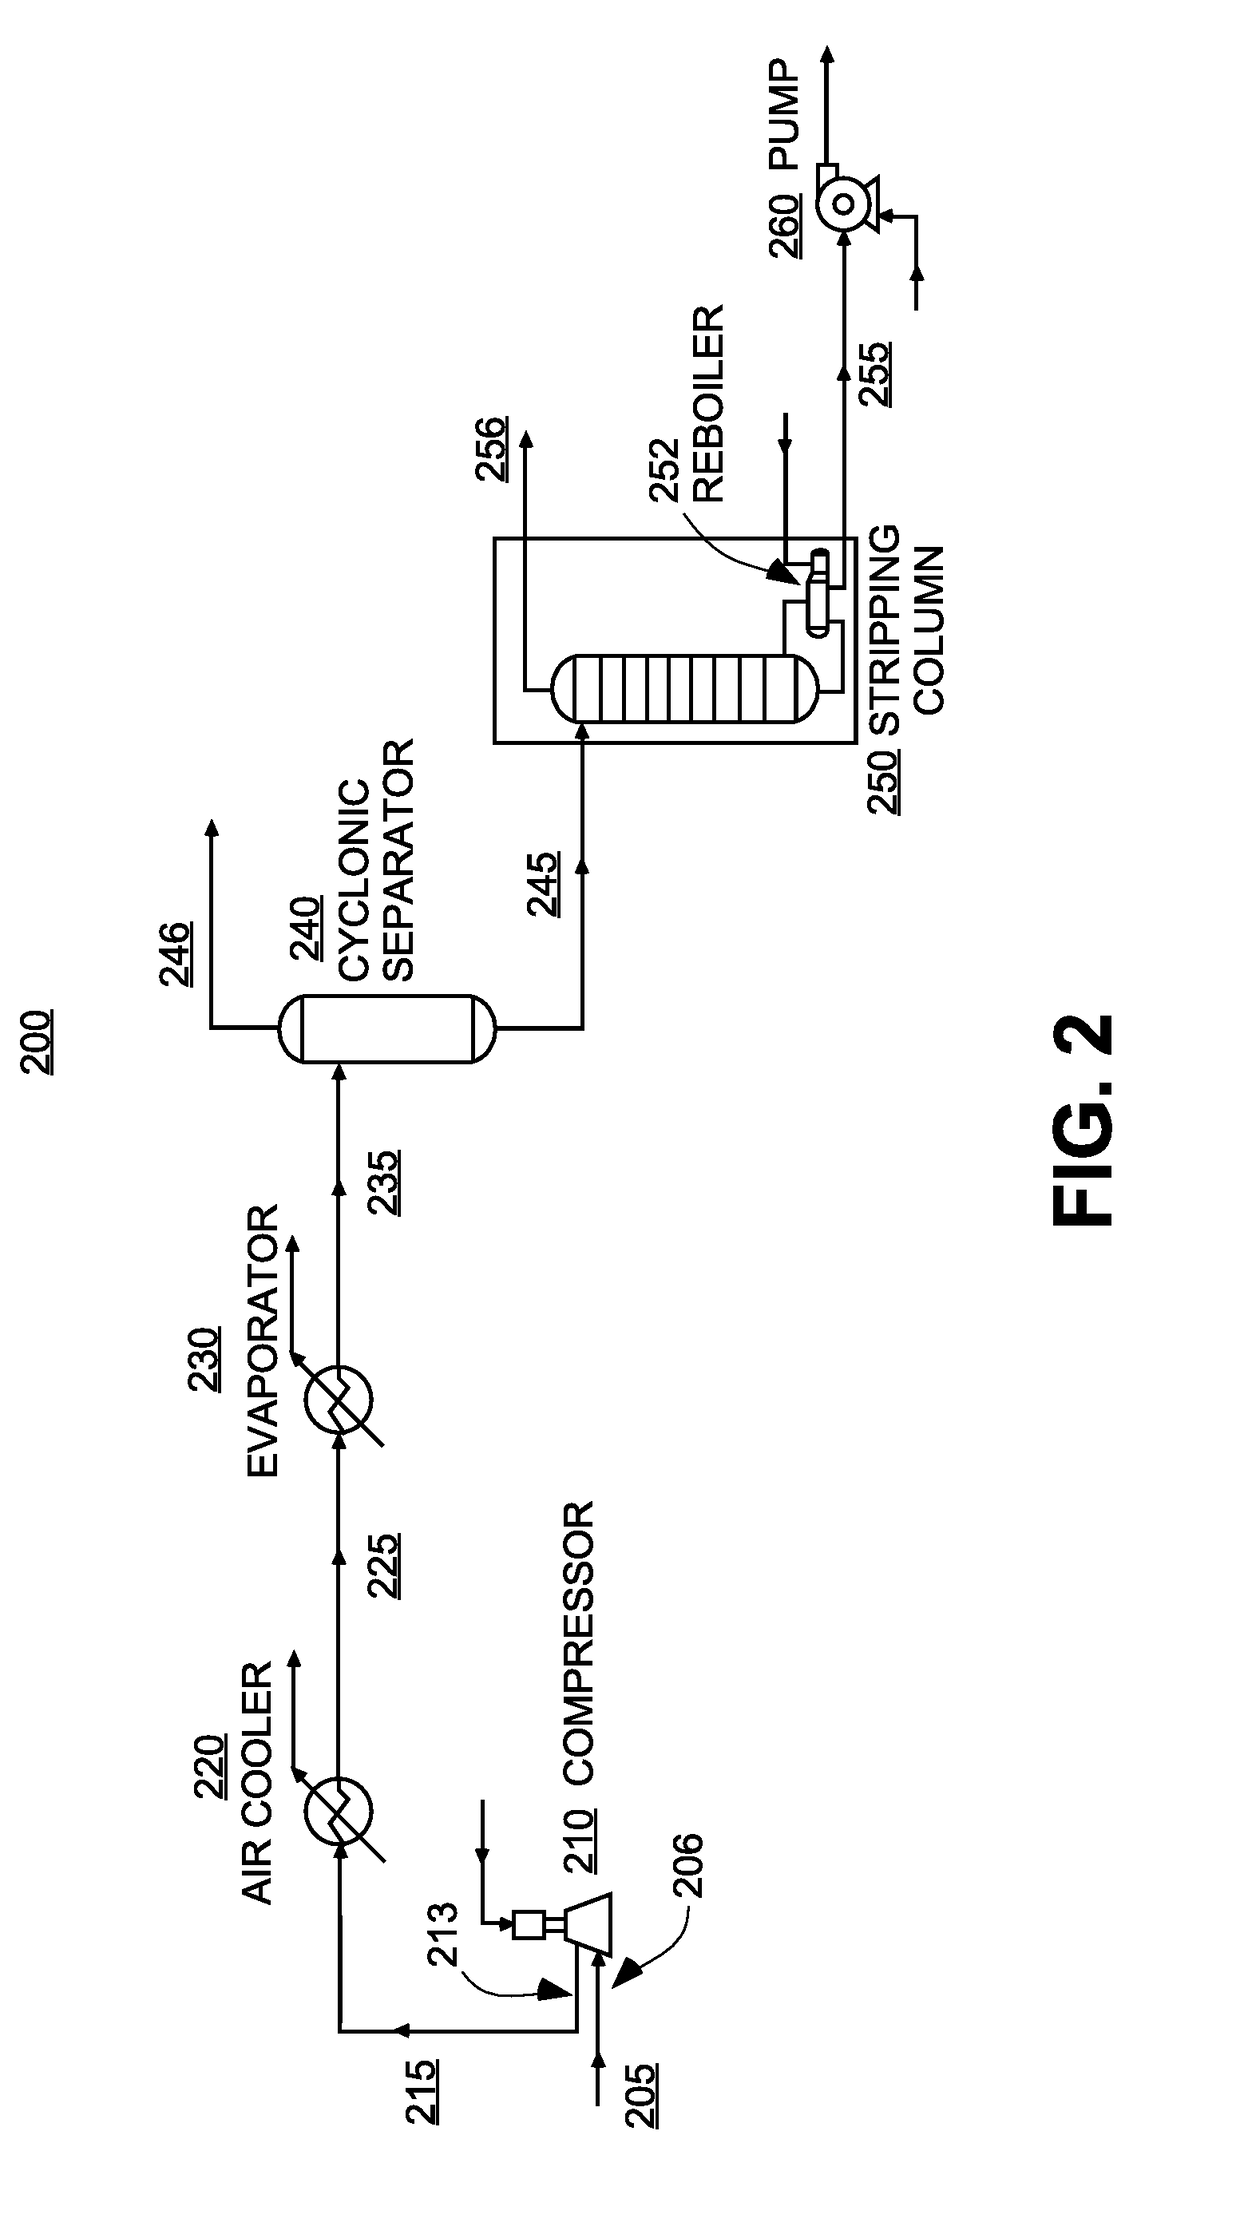 Systems and methods for capturing natural gas liquids from oil tank vapors